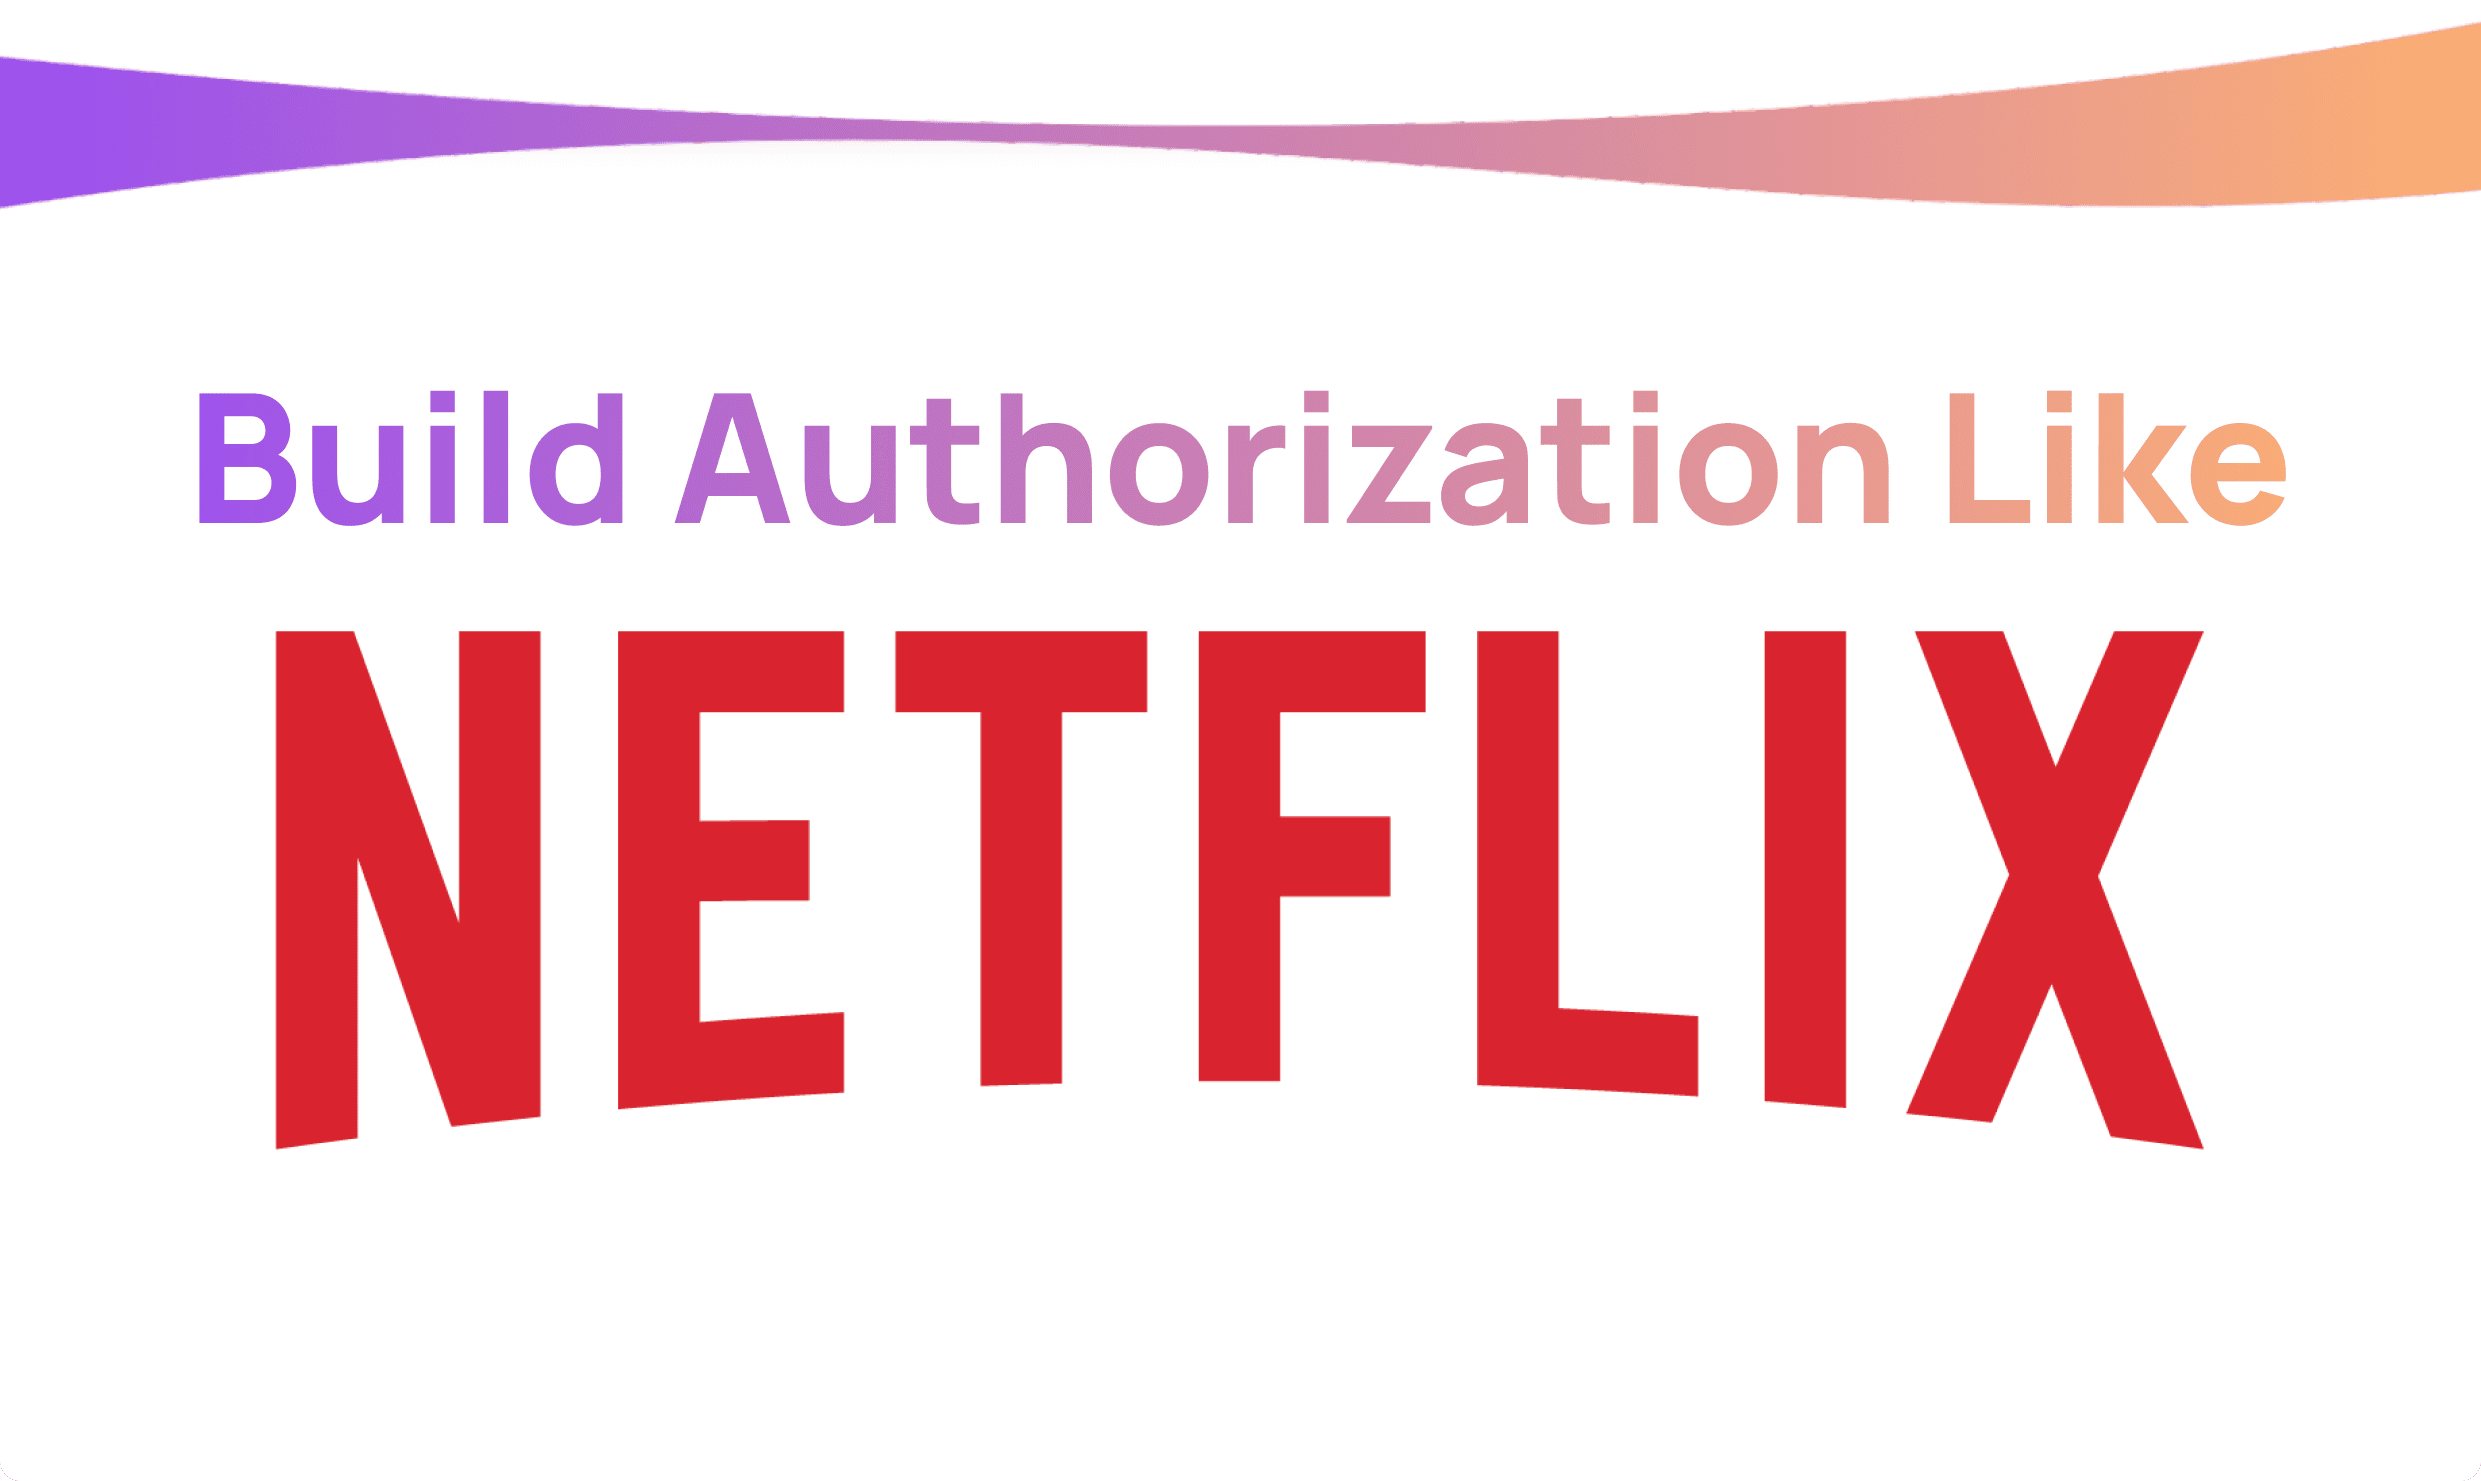 How to build authorization like Netflix with Open Source?